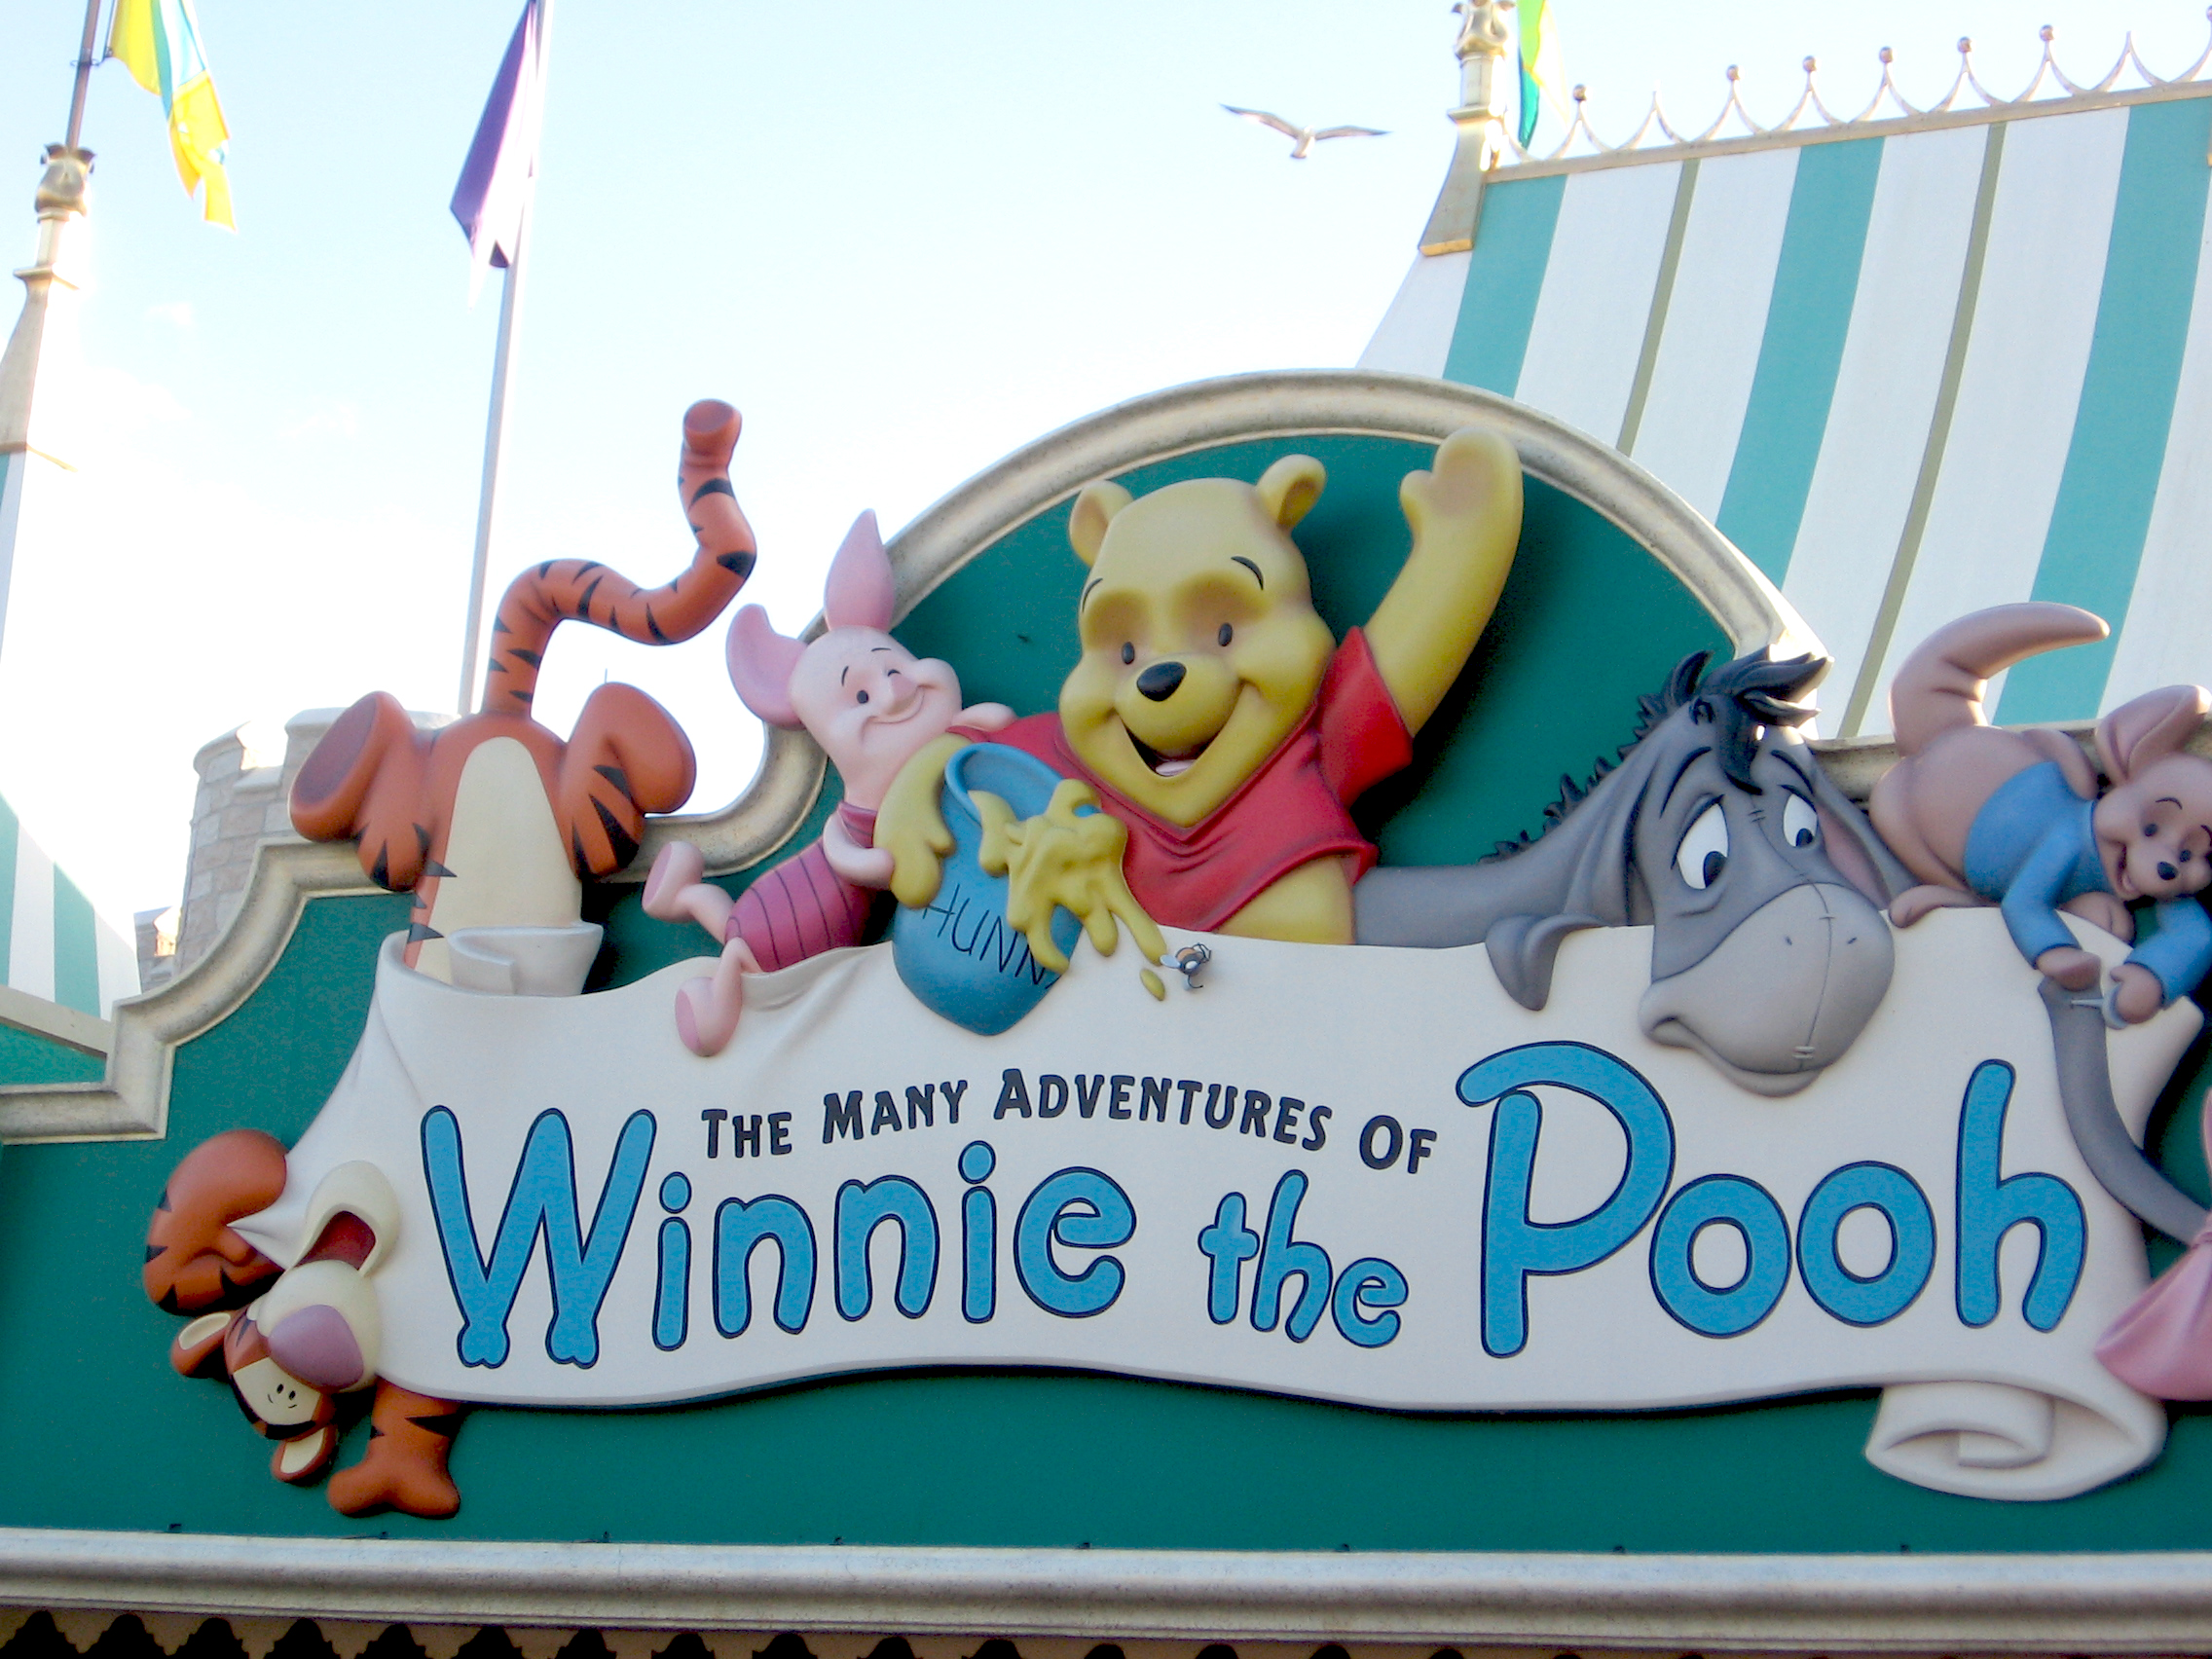 The Many Adventures of Winnie the Pooh (attraction) - Wikipedia